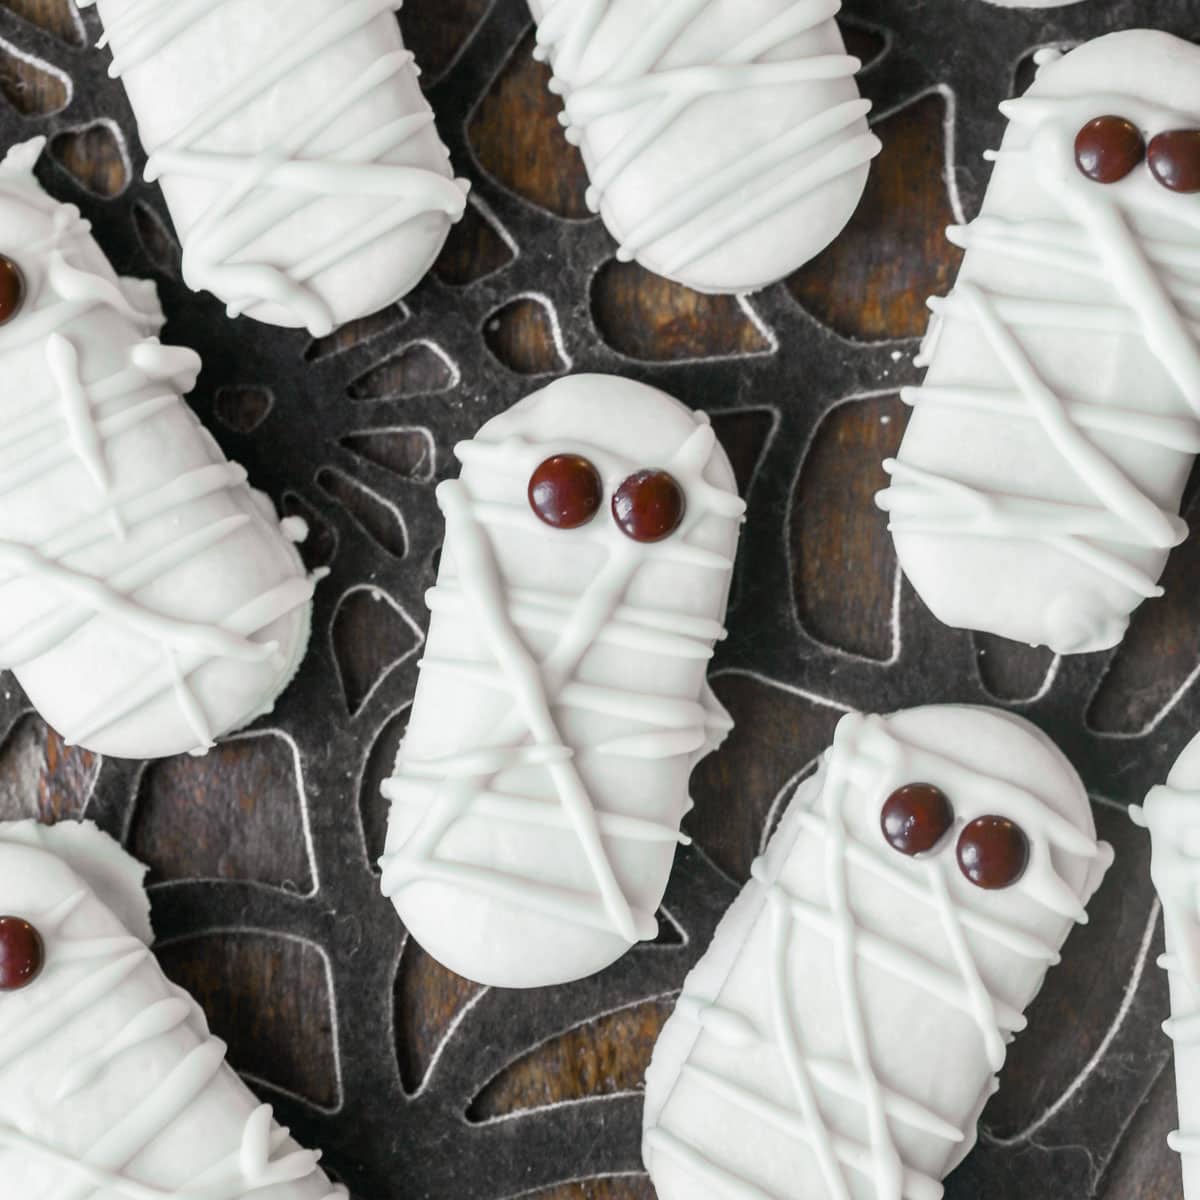 Halloween snacks - close up of mummy cookies topped with brown candy eyes.